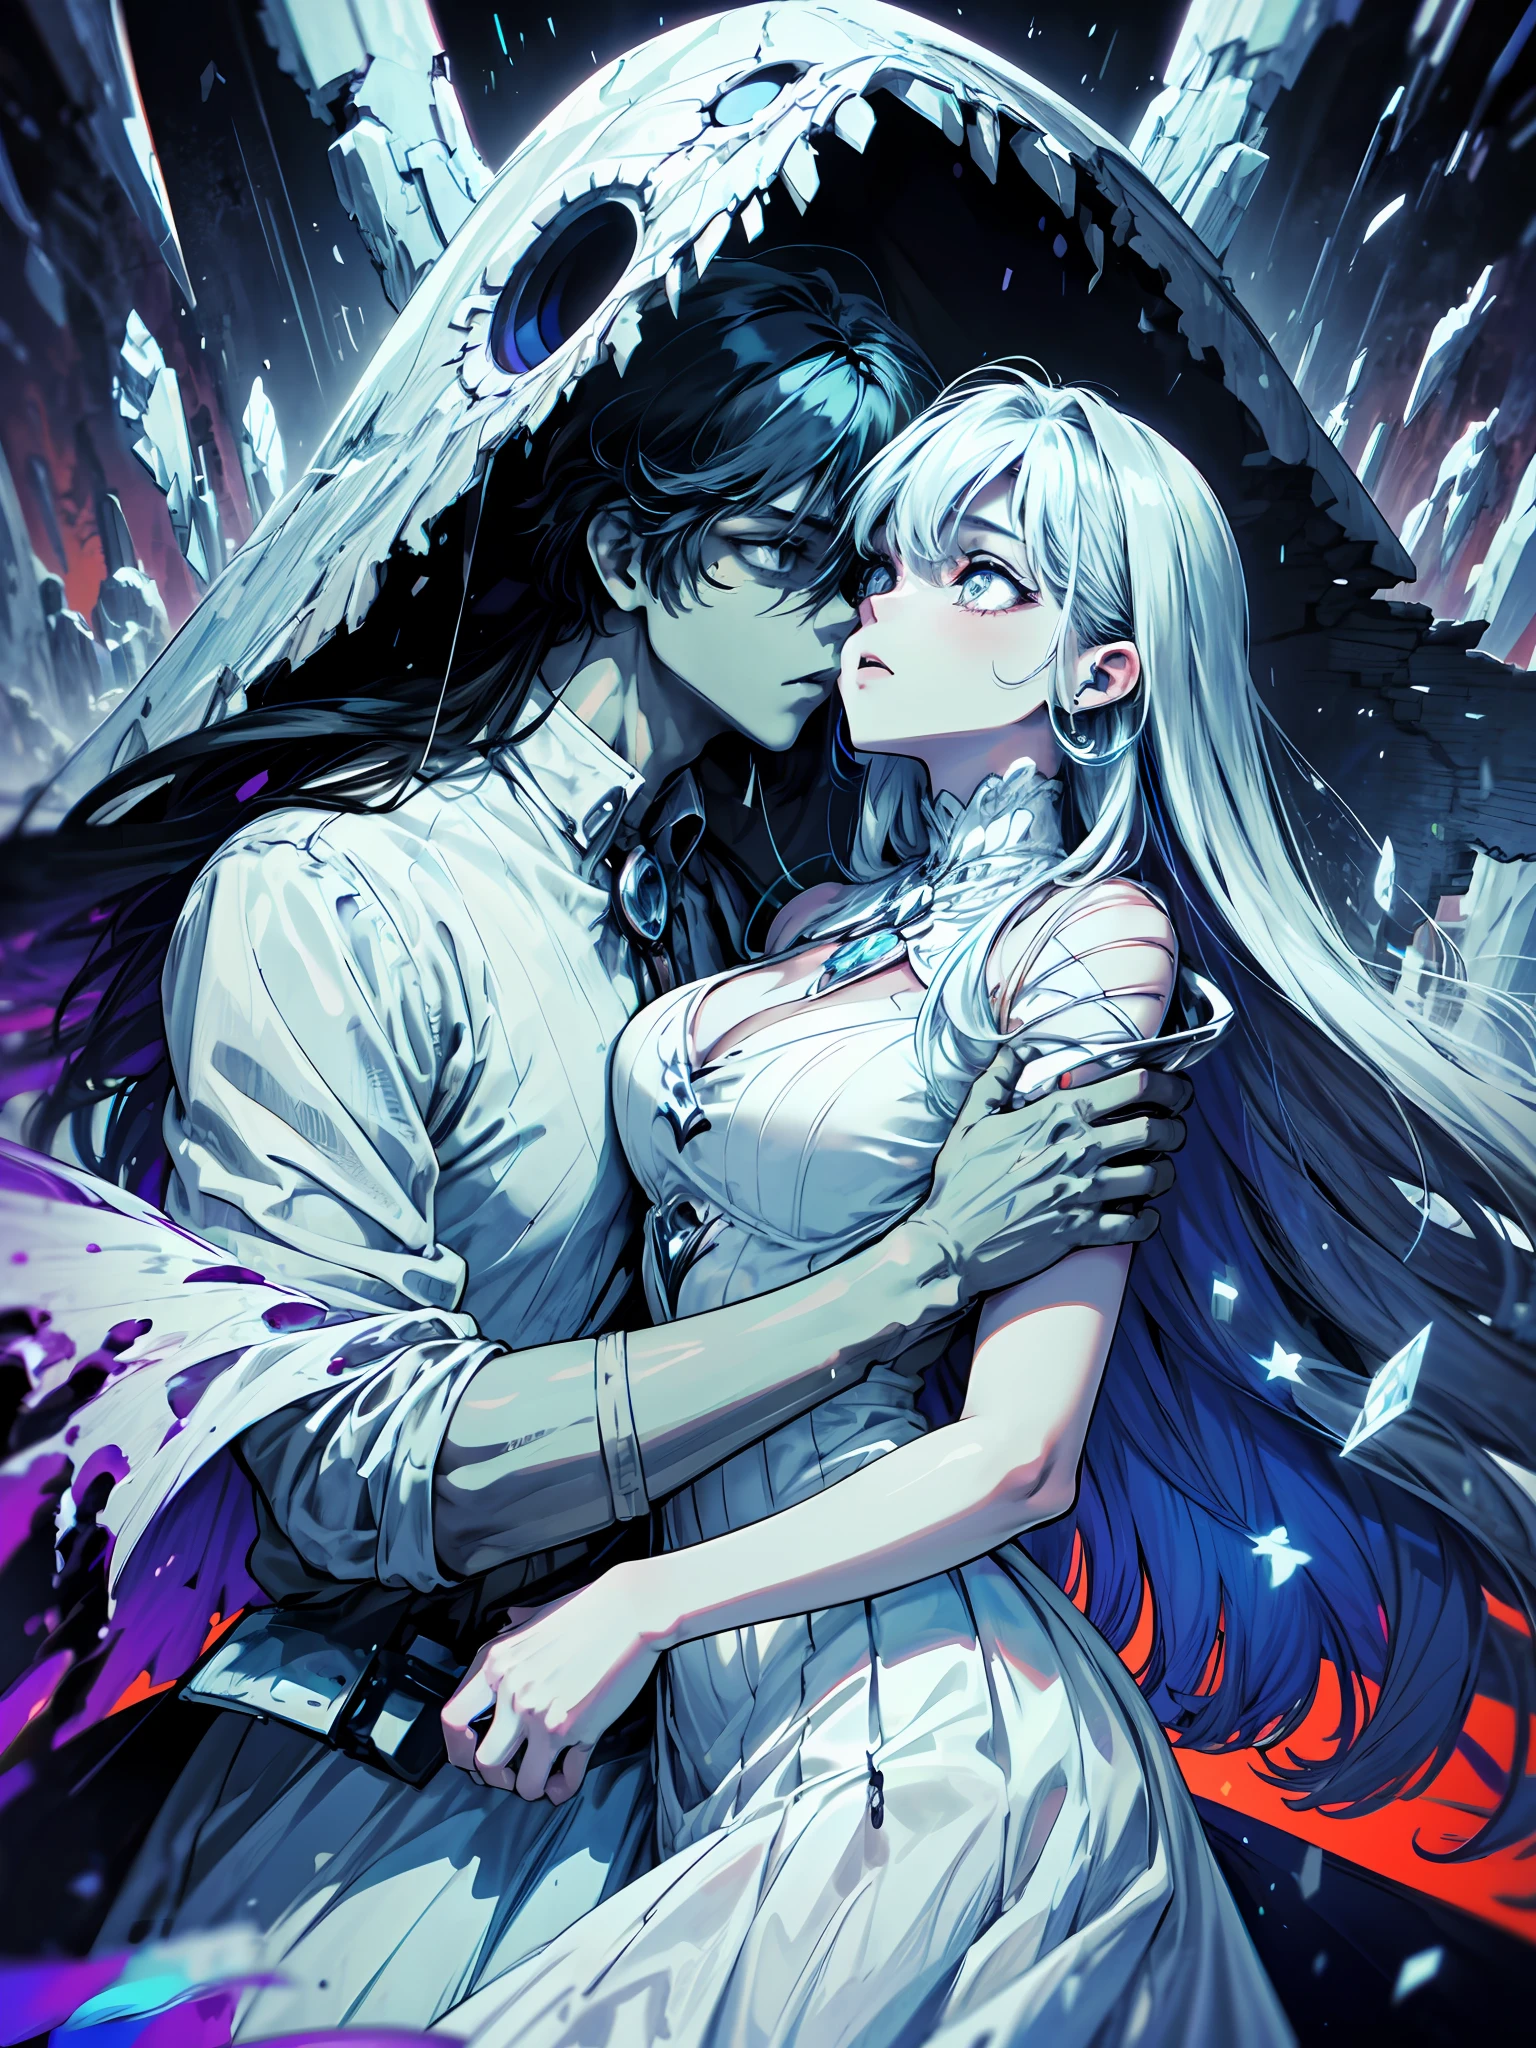 (romantic relationship between 1girl and 1boy), [Yuri,sfv], (forbidden love), 2person : {1eldritch girl, 1monsterboy}, girl wearing white dress, boy wearing black armor, dynamic view, Vast angle,Cowboy shot, beautiful emphasizing on face and eyes, sweetly detailed,intricate scenery, Contrast,[limited palette[Rust,Silver,blood]],professional coloring,sumptuous artwork,artistic representation of devastation, twisted romantic aesthetic,(illustration,extremely precisely drawn:1.2), A high resolution,Best quality